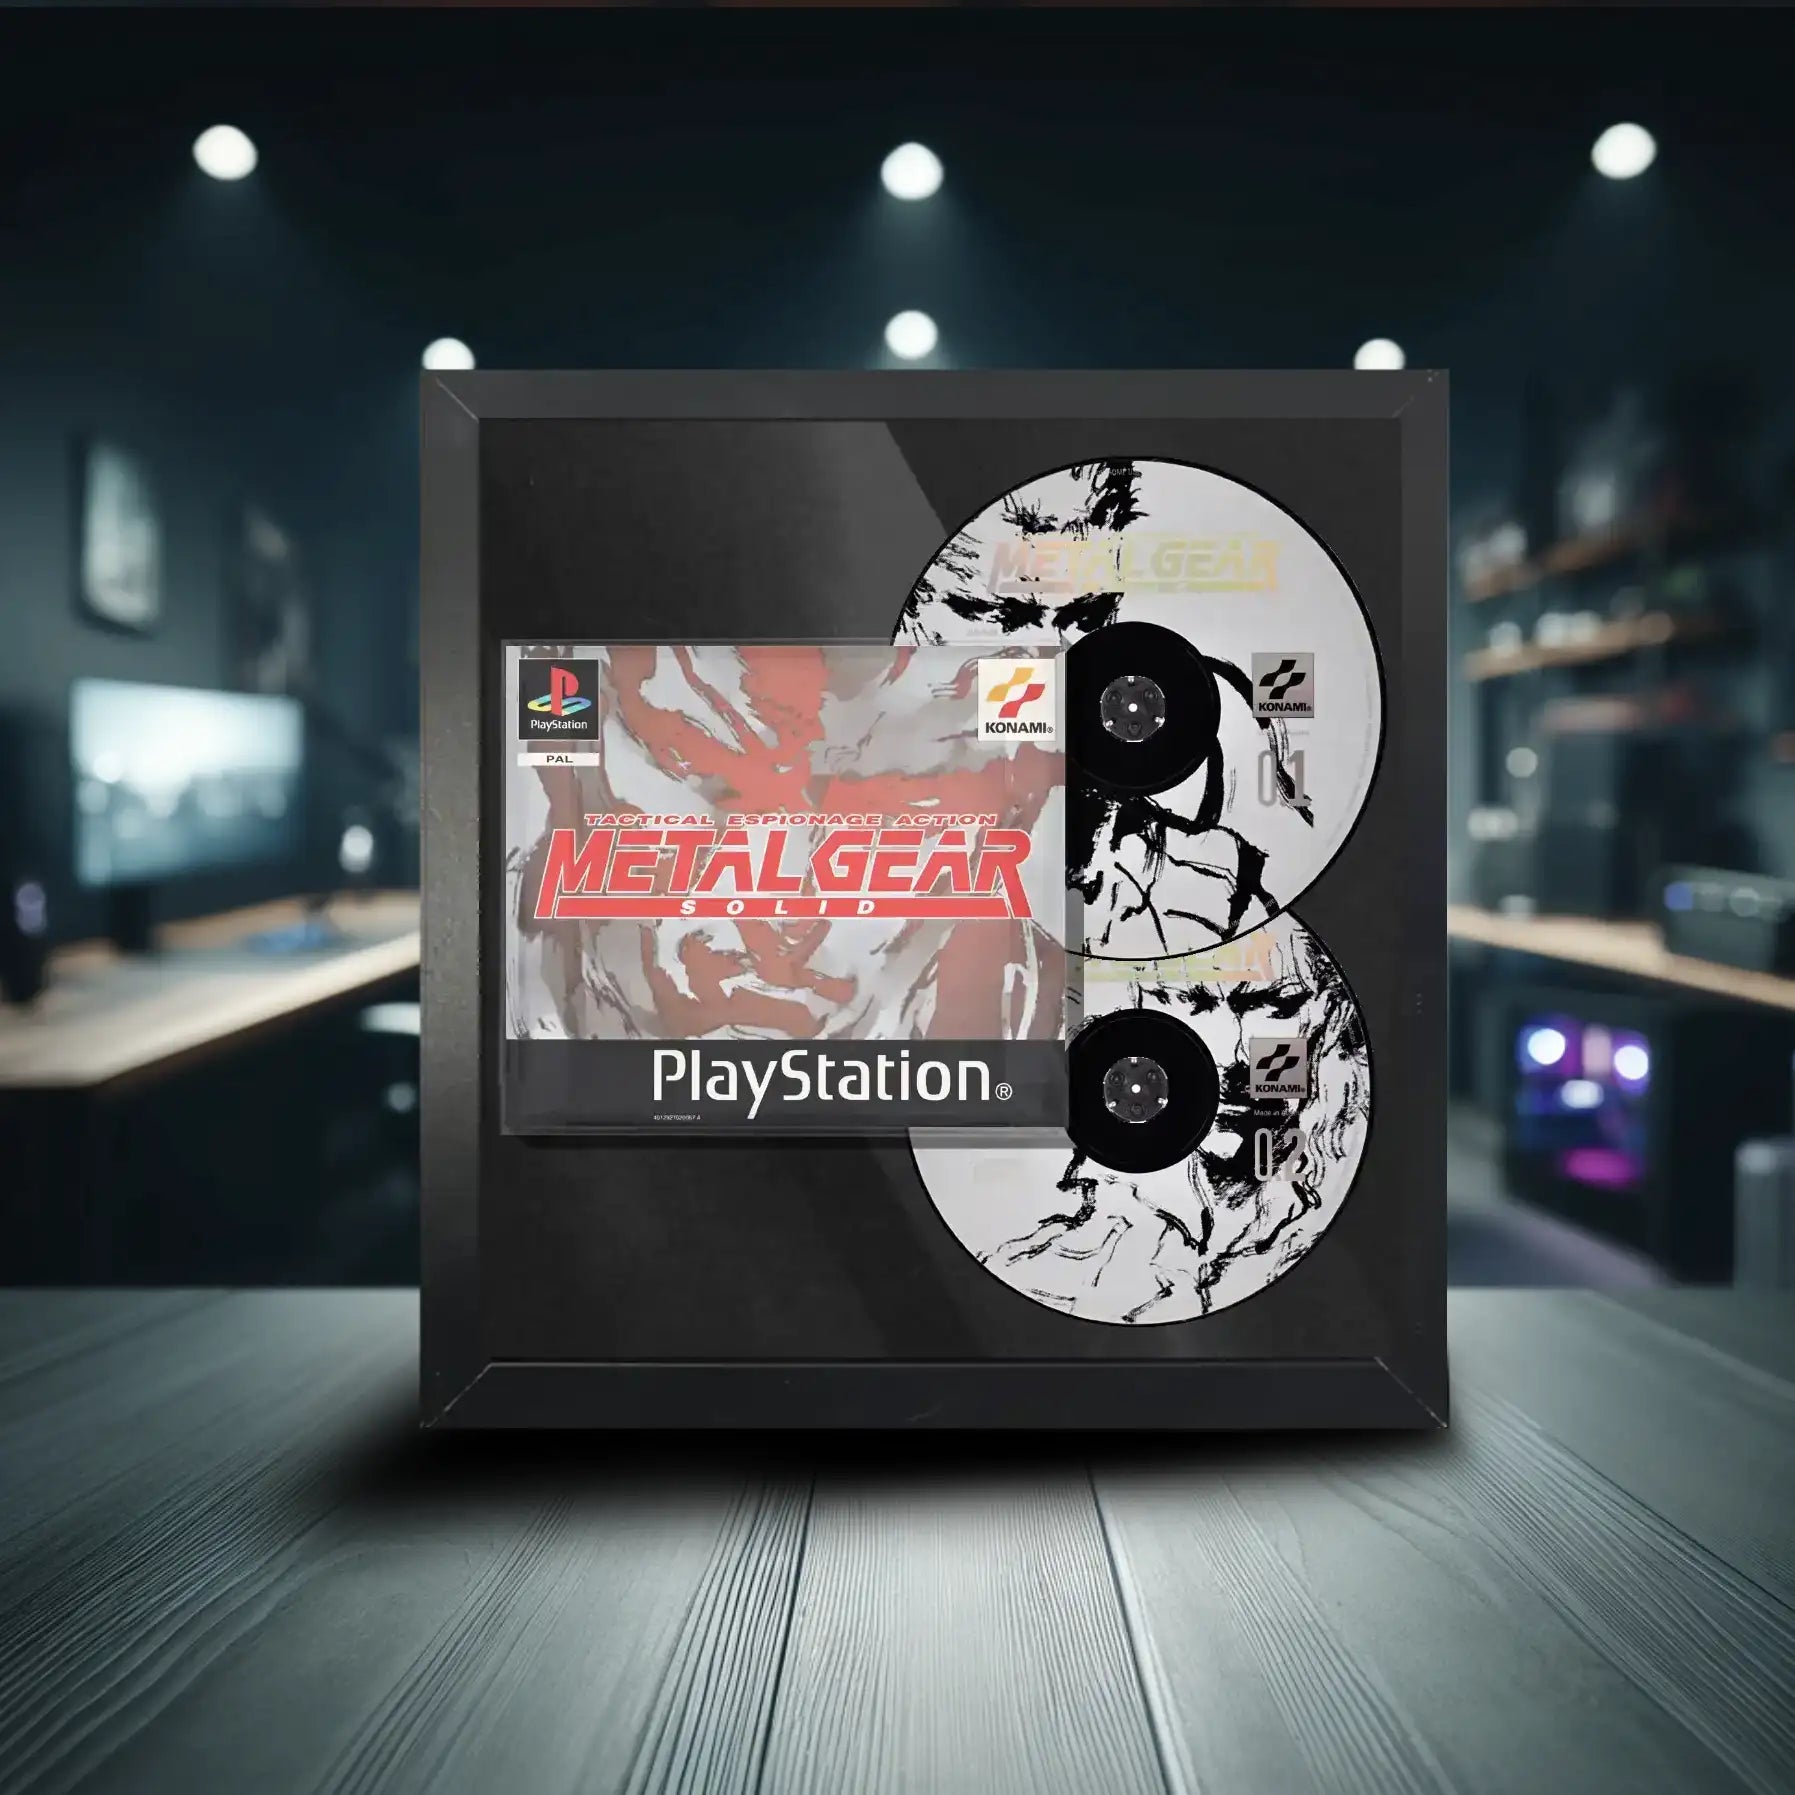 Playstation 1 Metal Gear Solid with 2 discs inside a frame made for framing video games and films